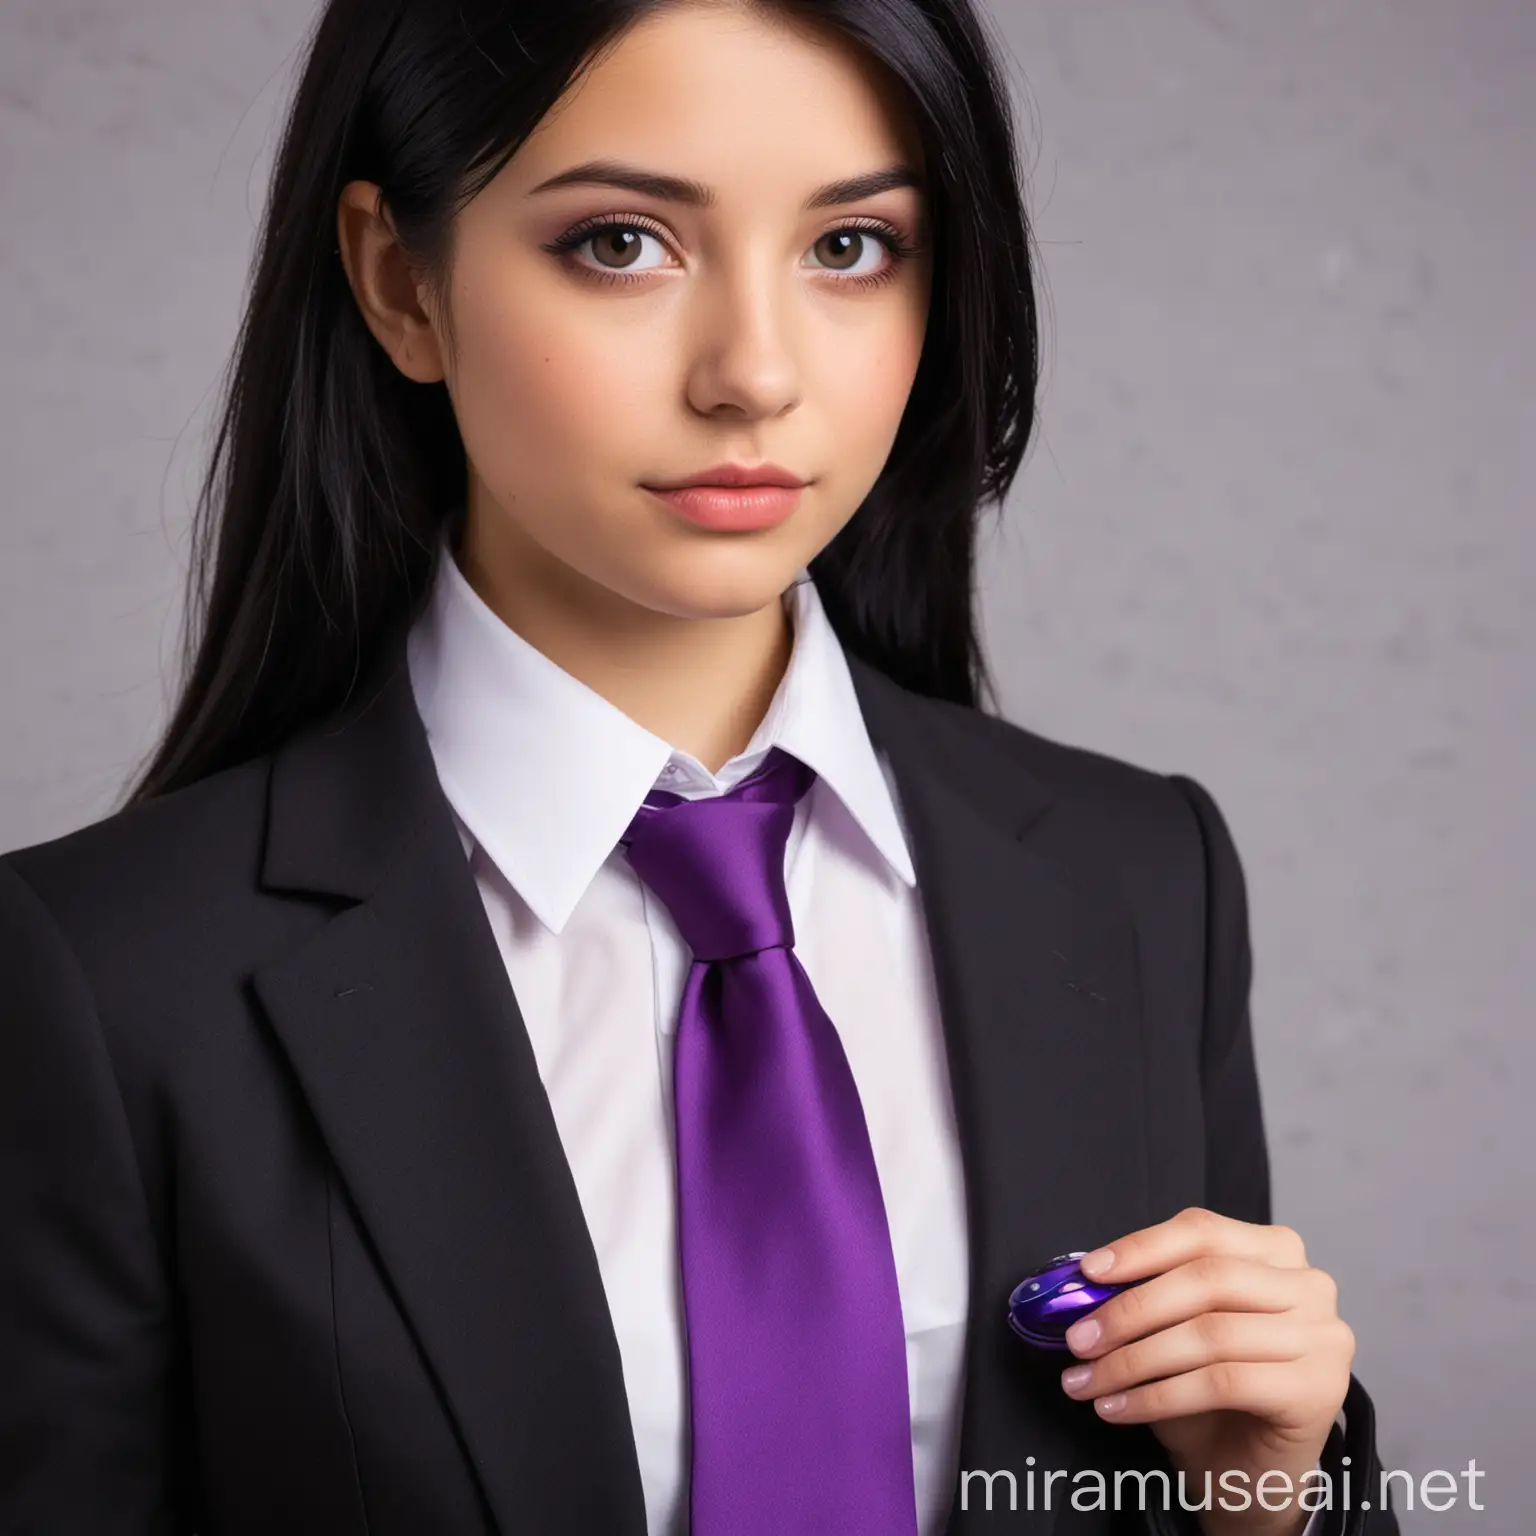 A girl with black hair wearing a formal suit and a violet computer mouse as a necktie